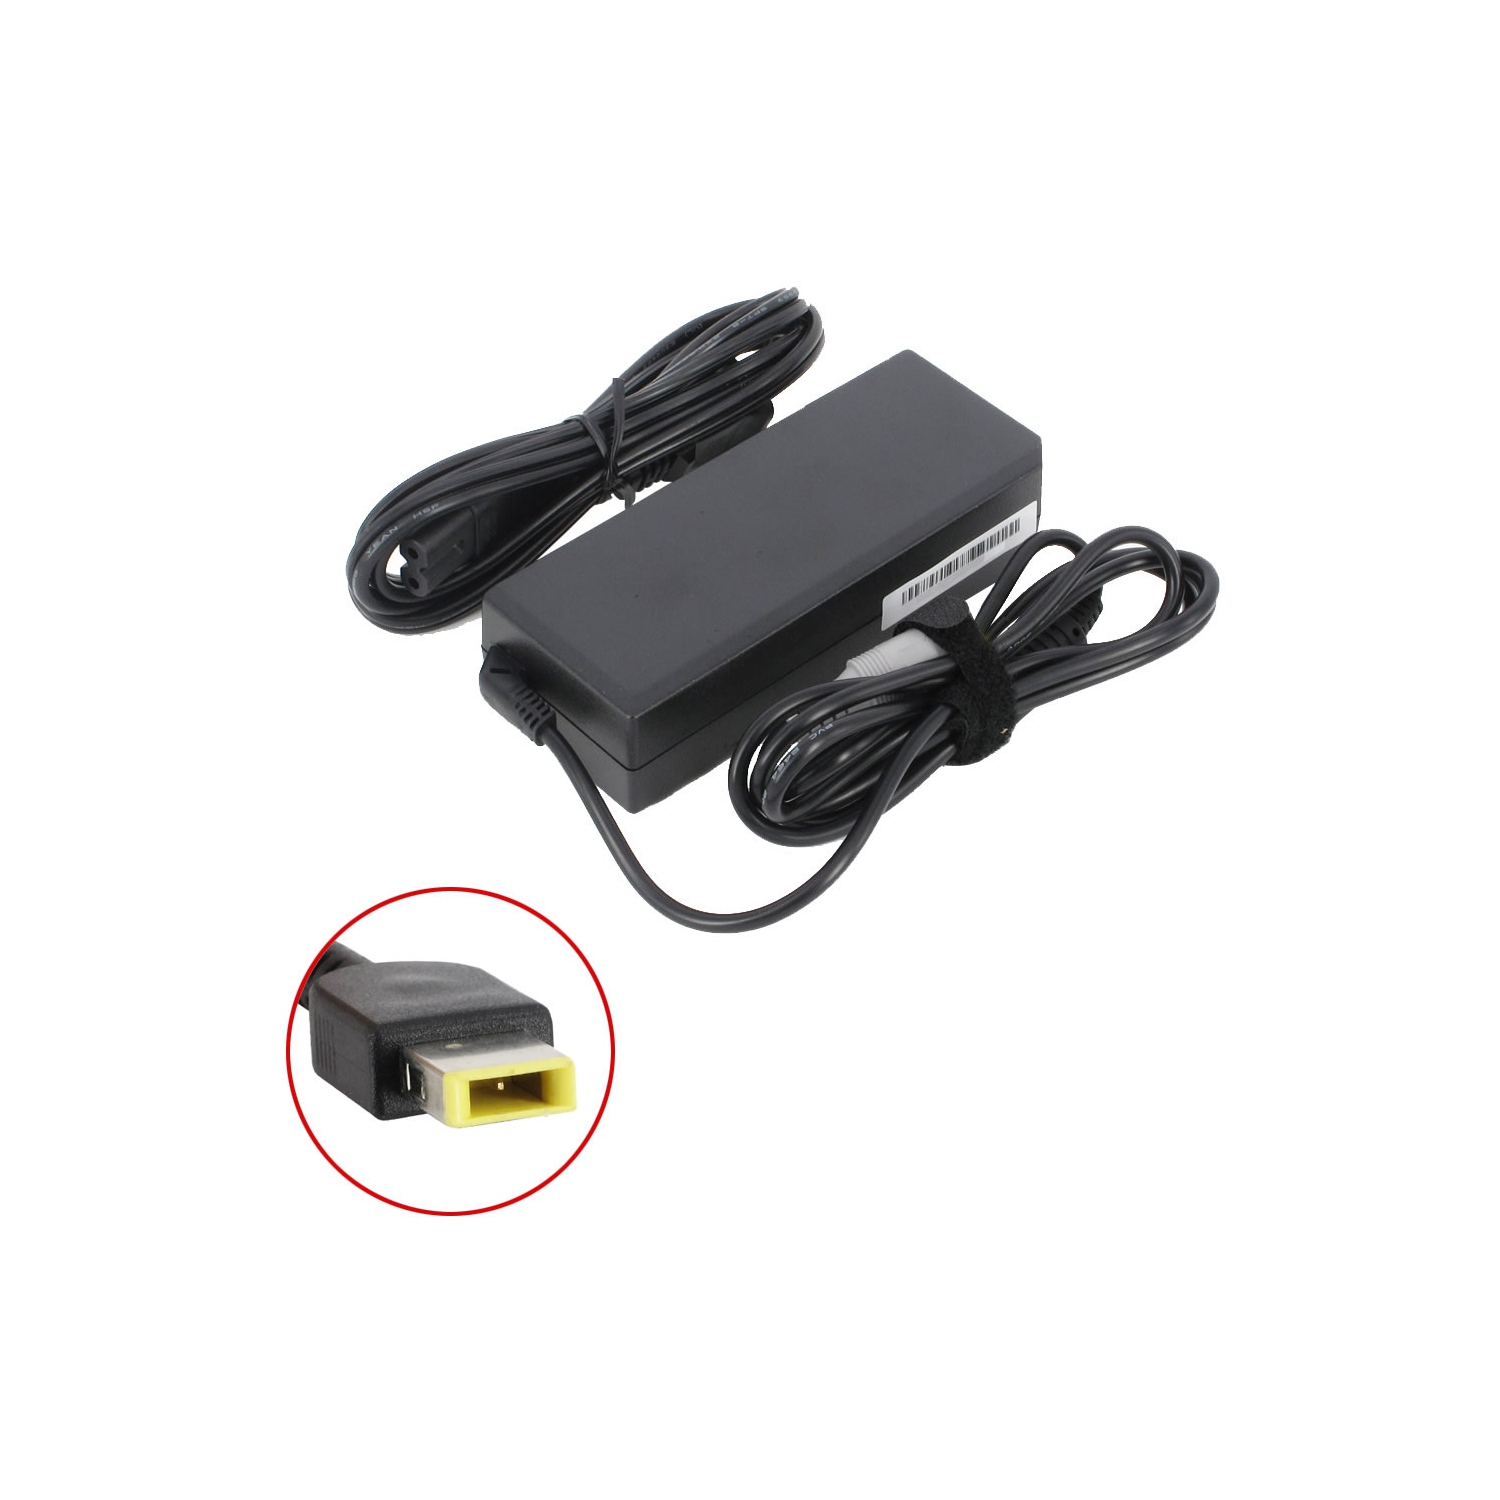 Brand New Laptop AC Adapter for Lenovo G50-80 80E501HXUS, ADP-65XB A, 0B47481, 45N0293, 45N0482, PA-1650-37LF